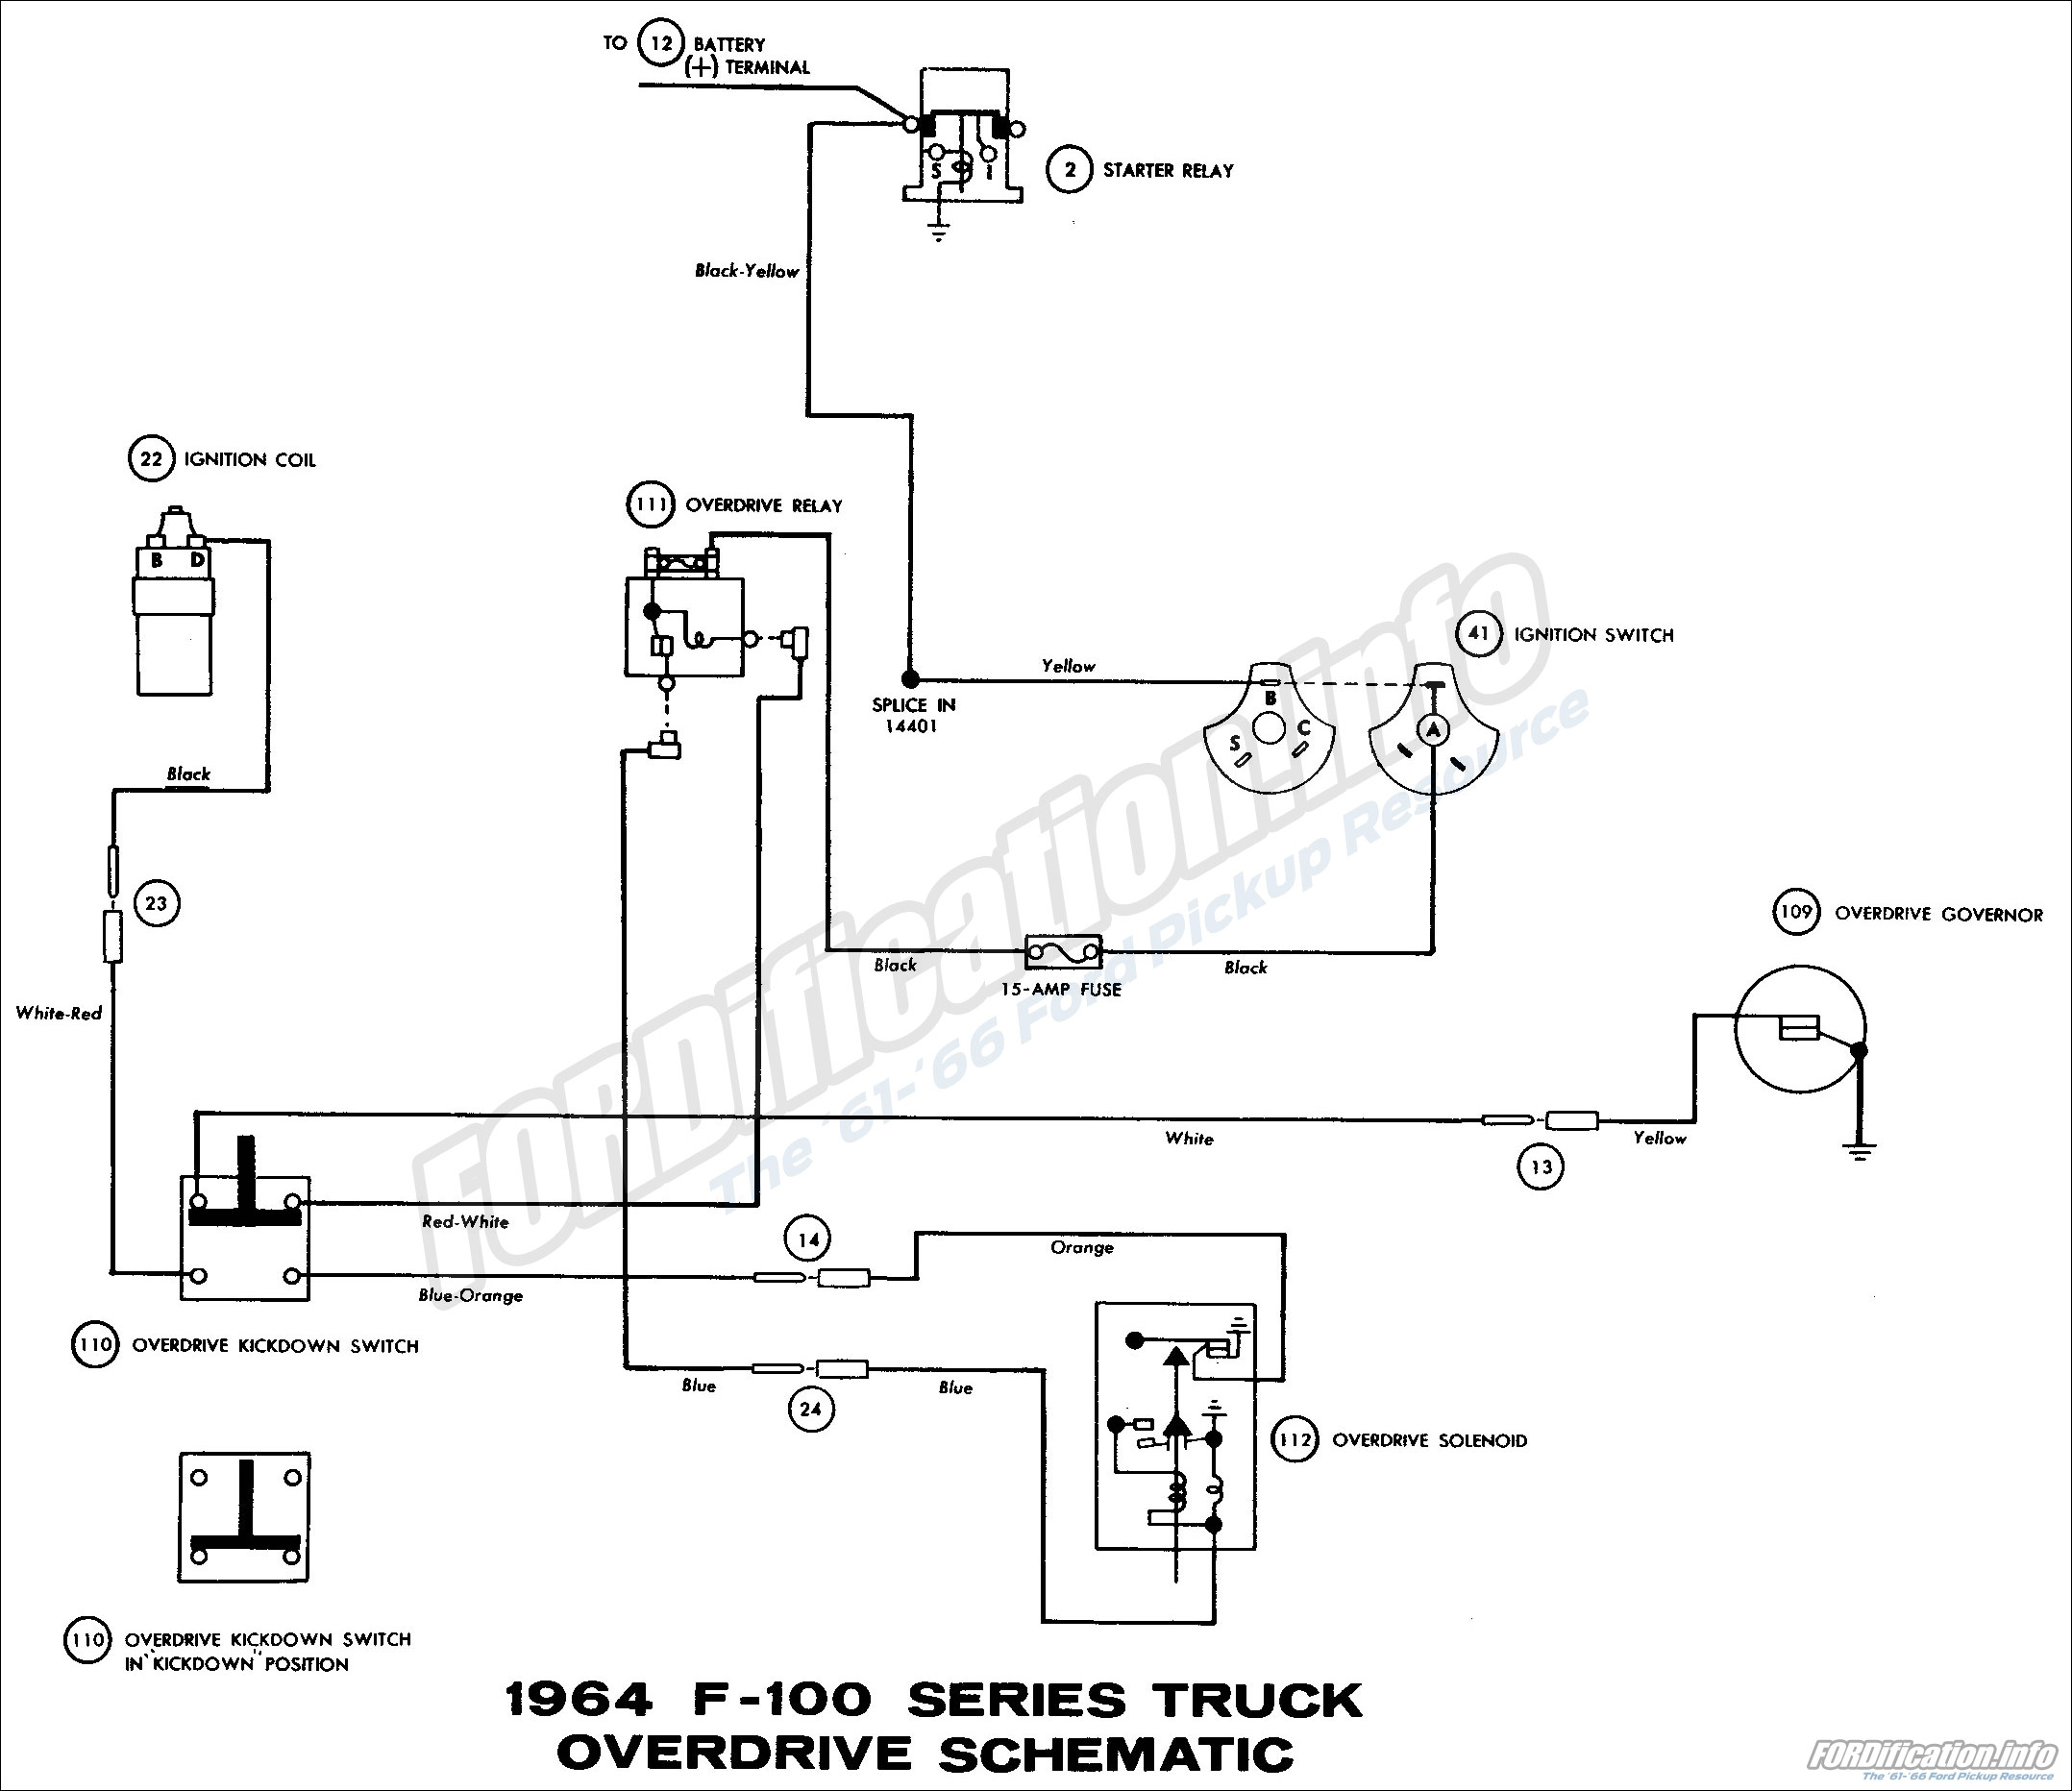 1964 Ford Truck Wiring Diagrams - FORDification.info - The ... ignition wiring diagram for 2004 f250 